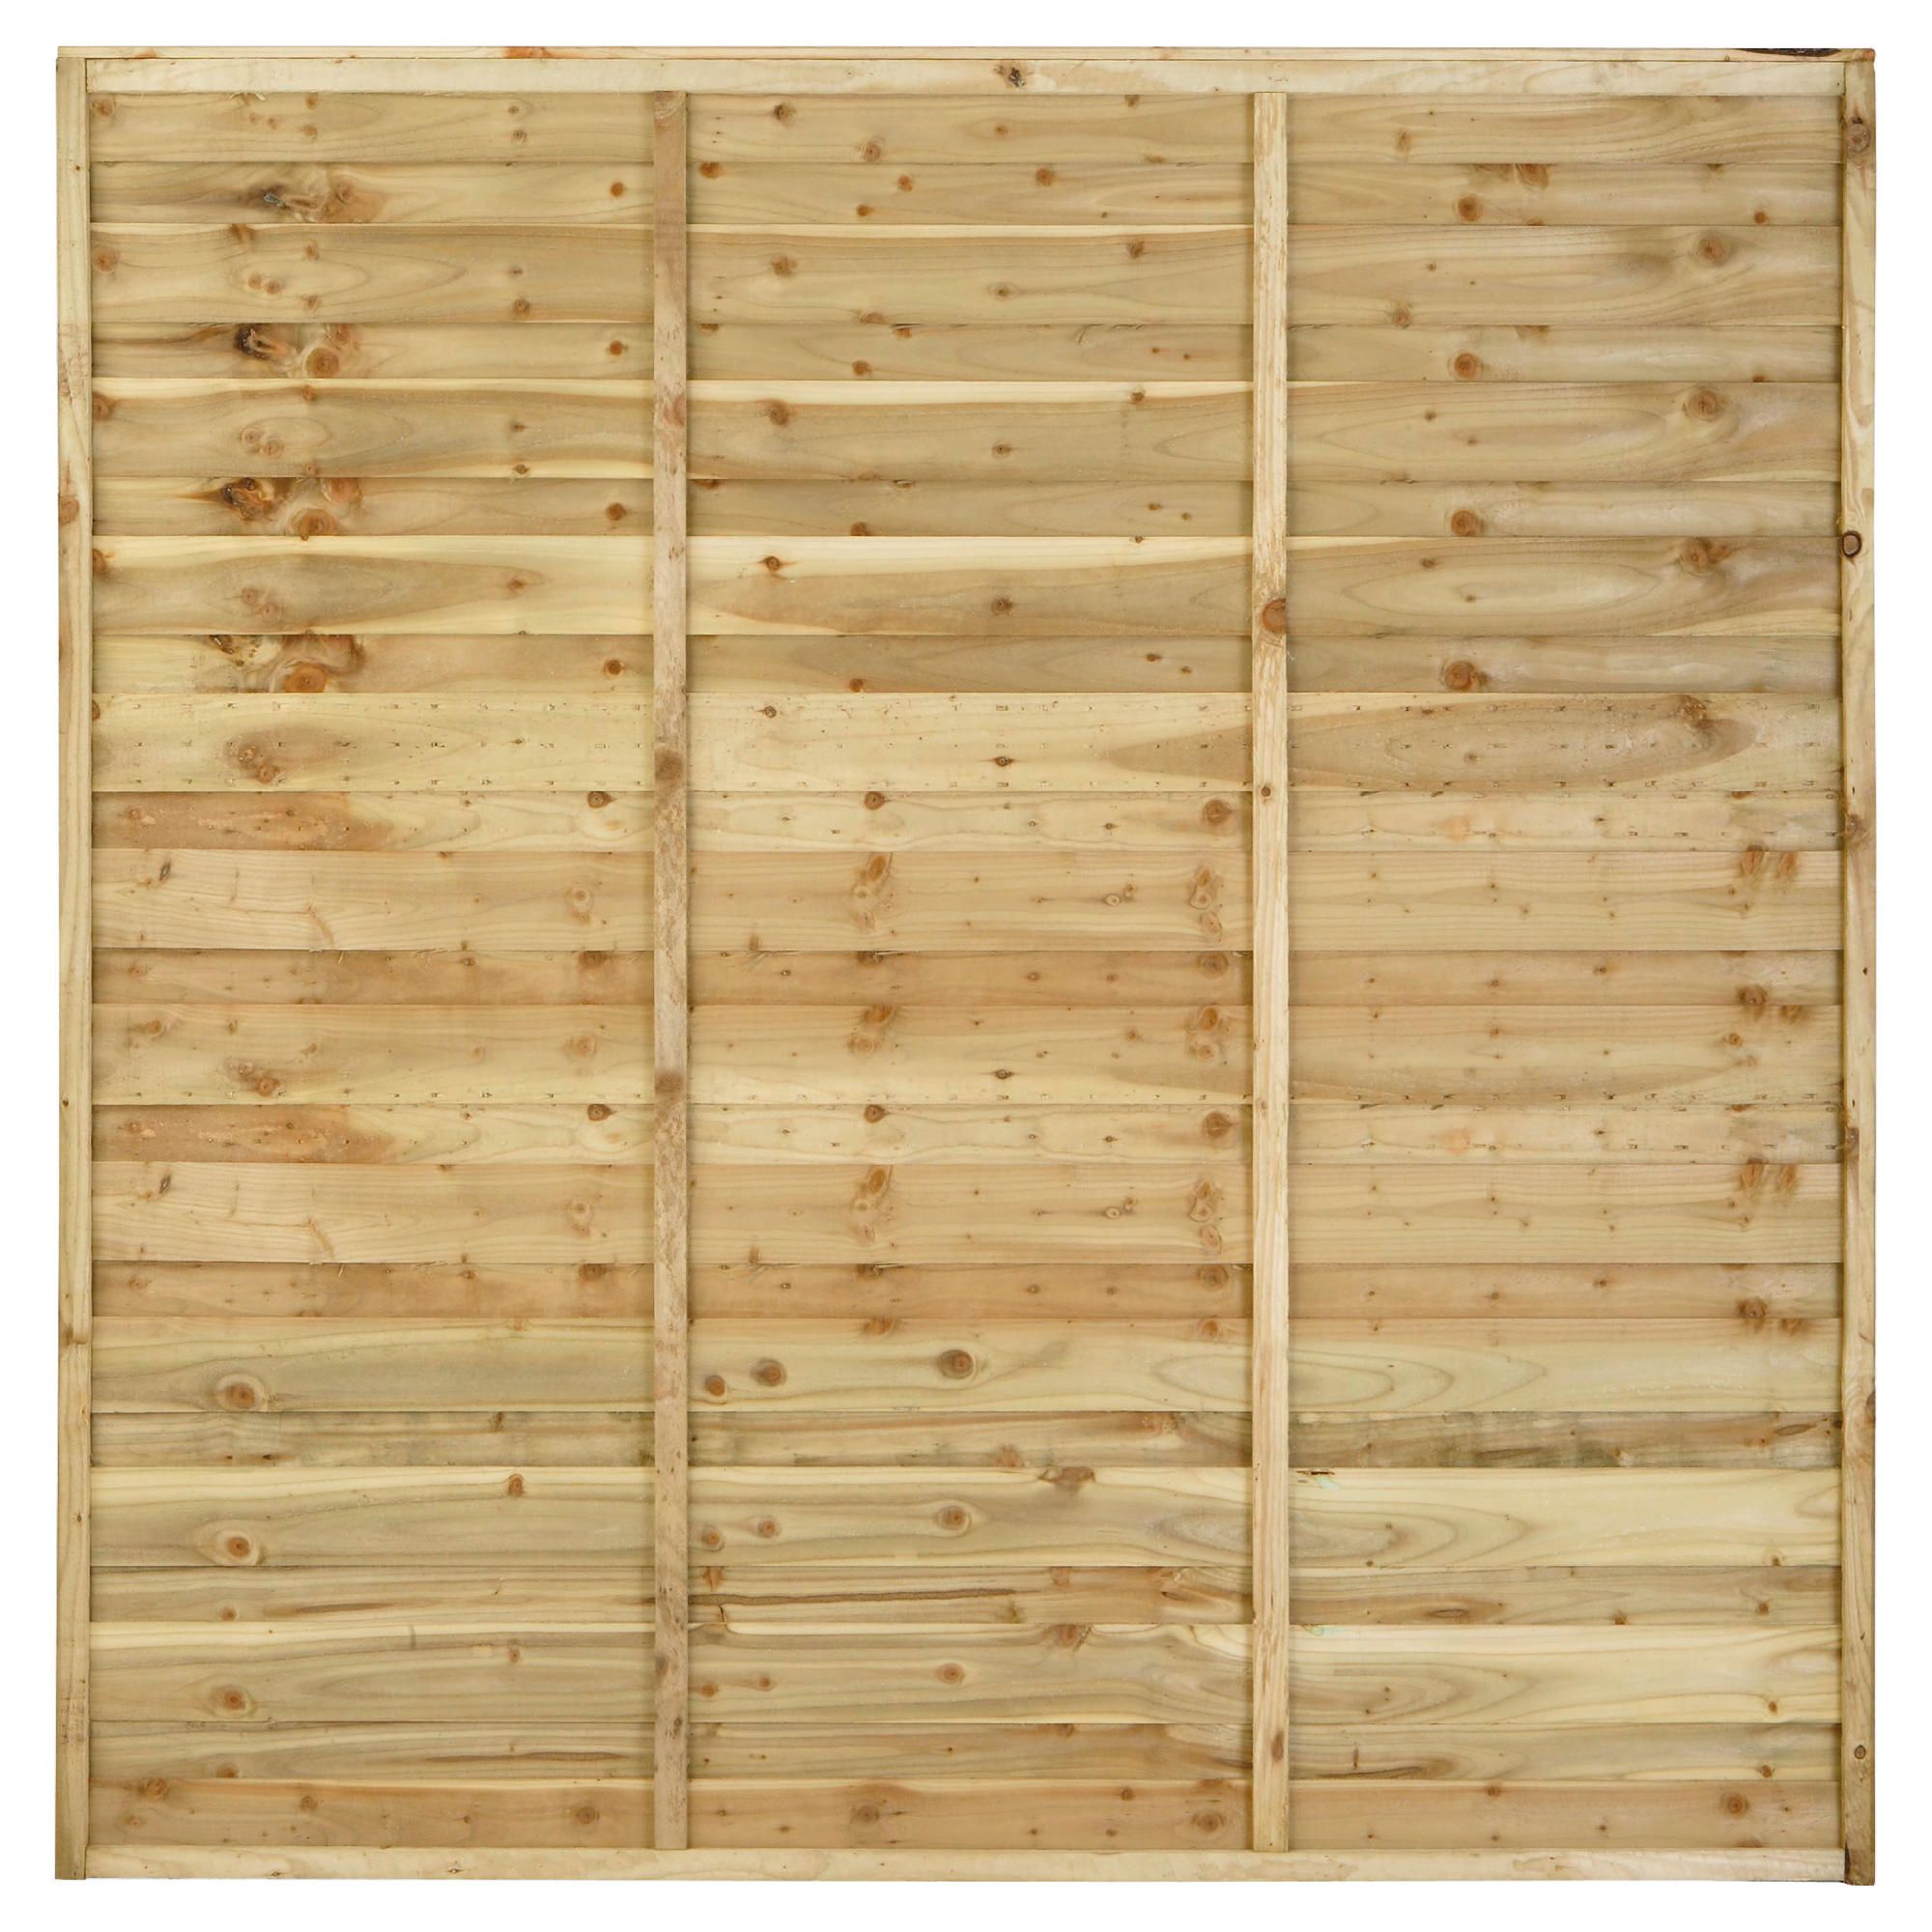 Timberdale 6x6 Sutton Panel Pack of 10 at Tesco Direct